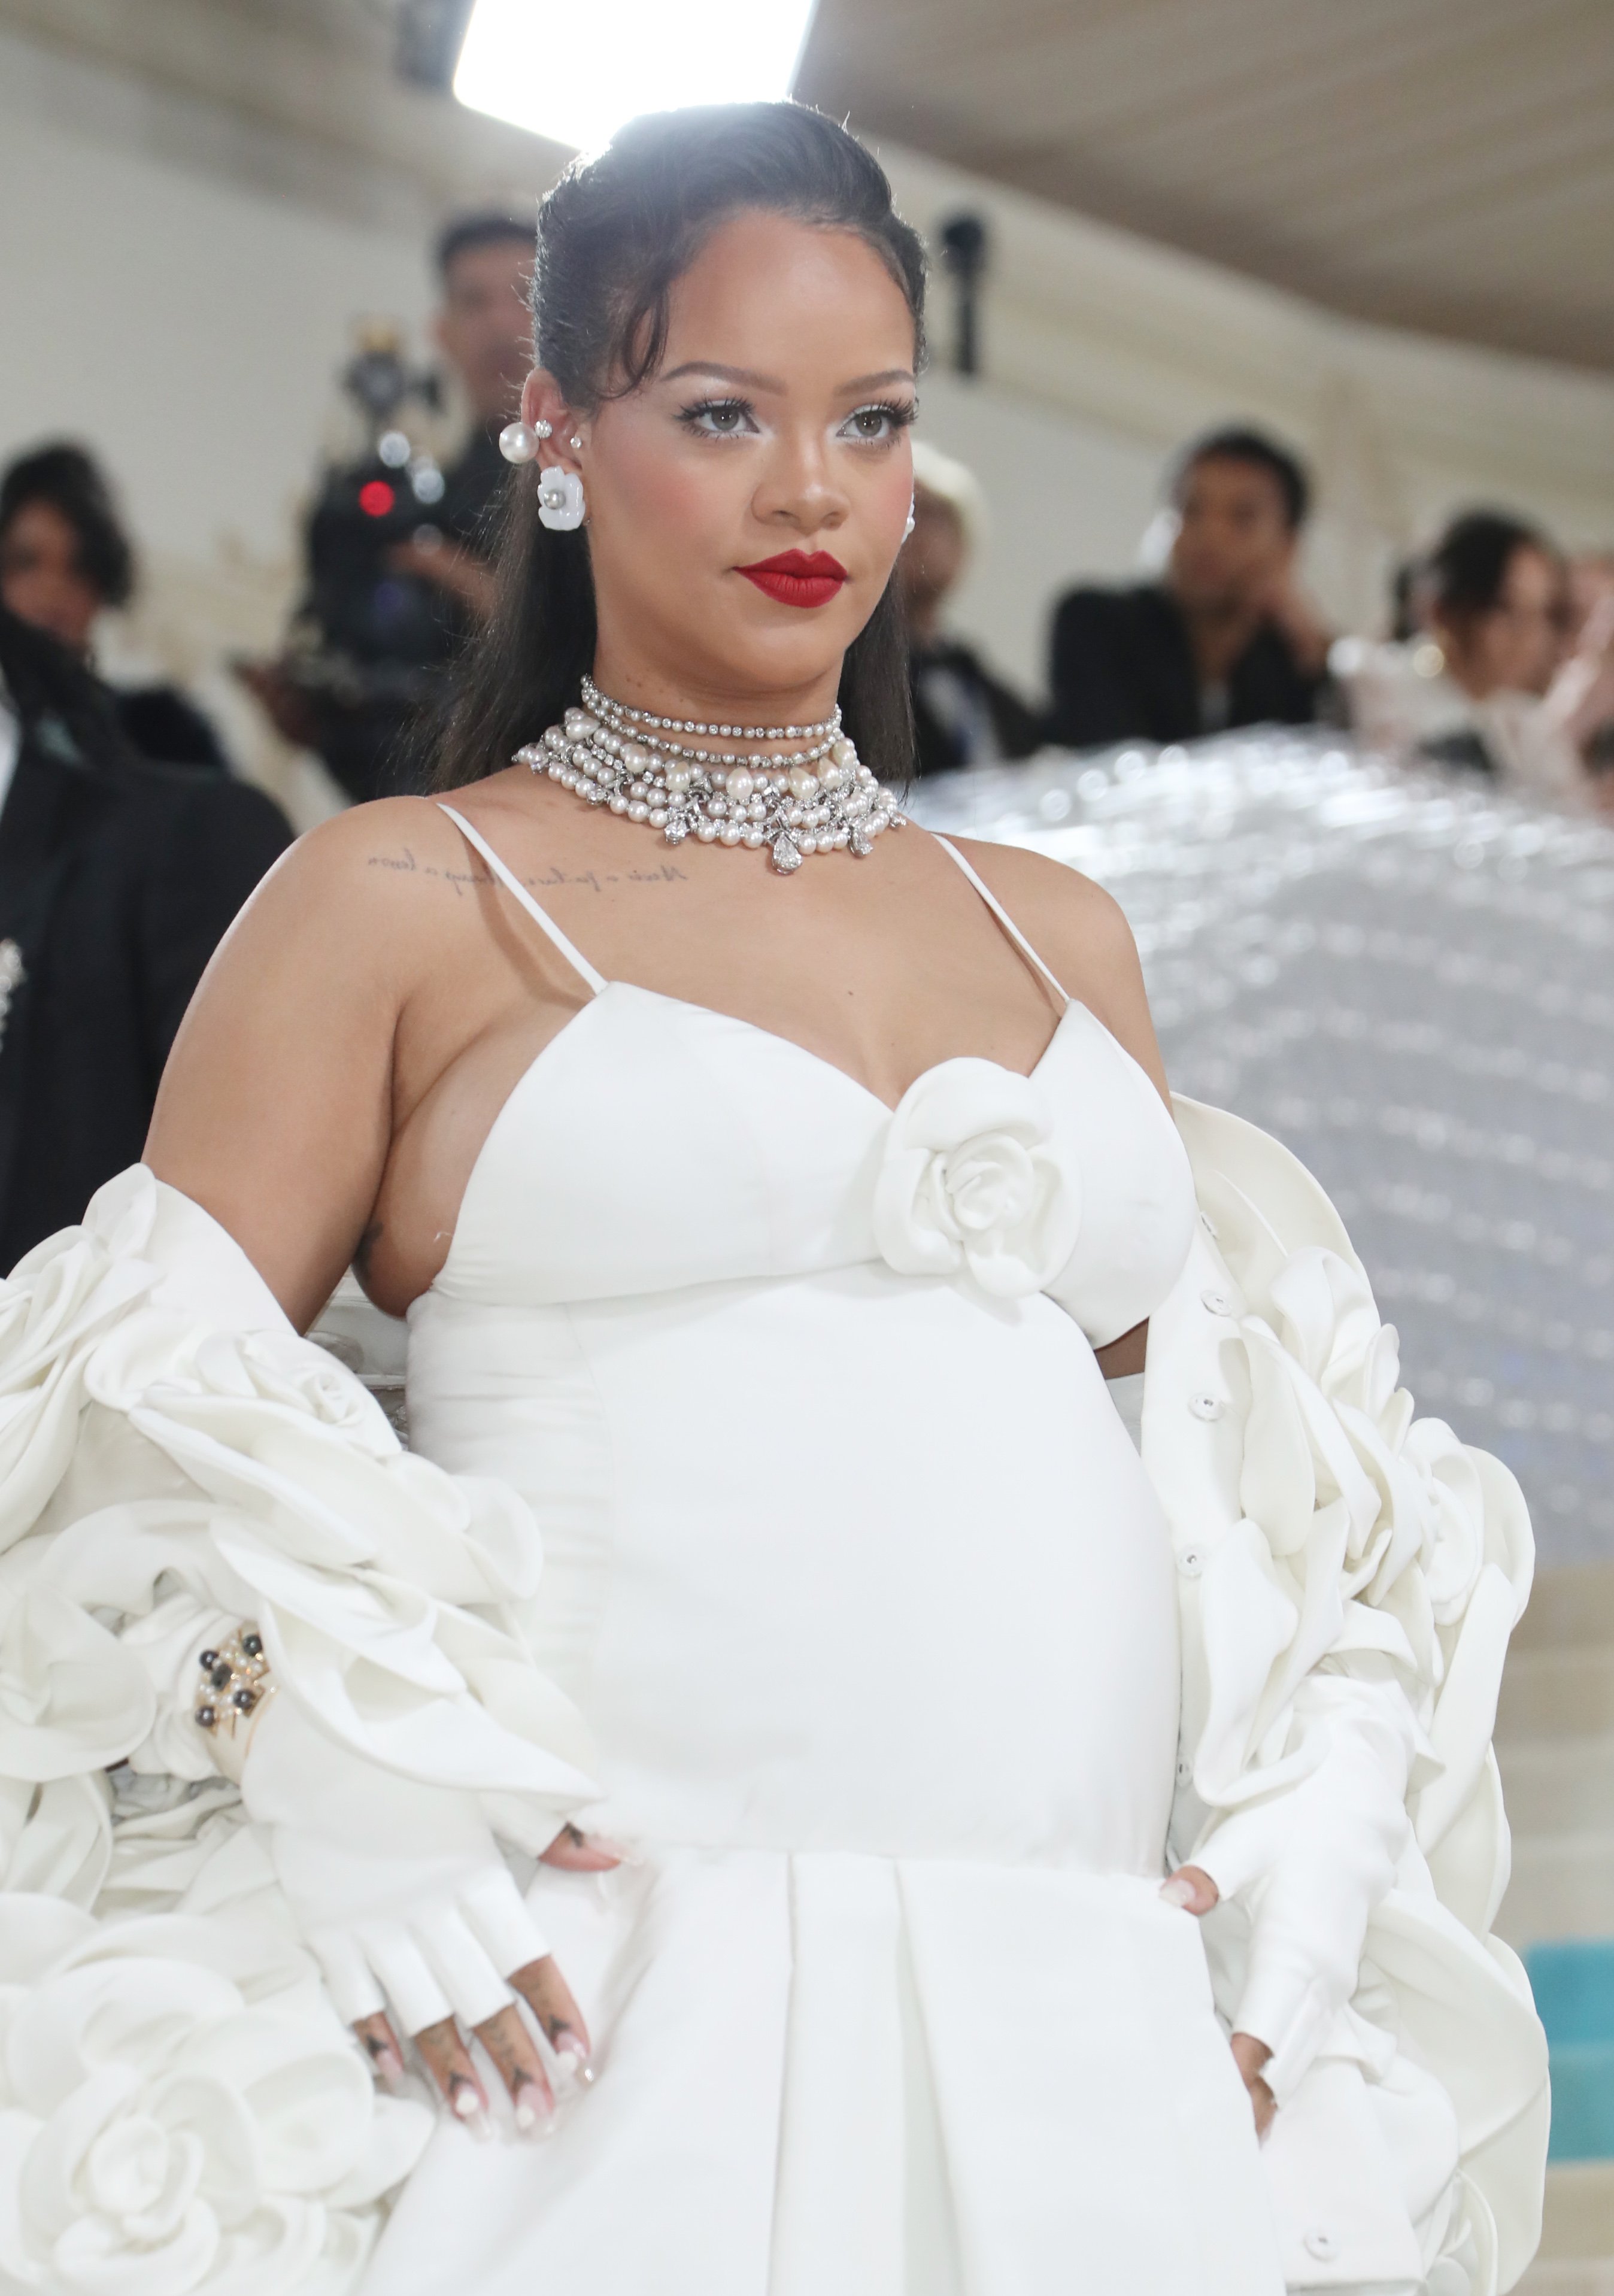 Rihanna Pregnancy Style: Fashionable Maternity Outfits